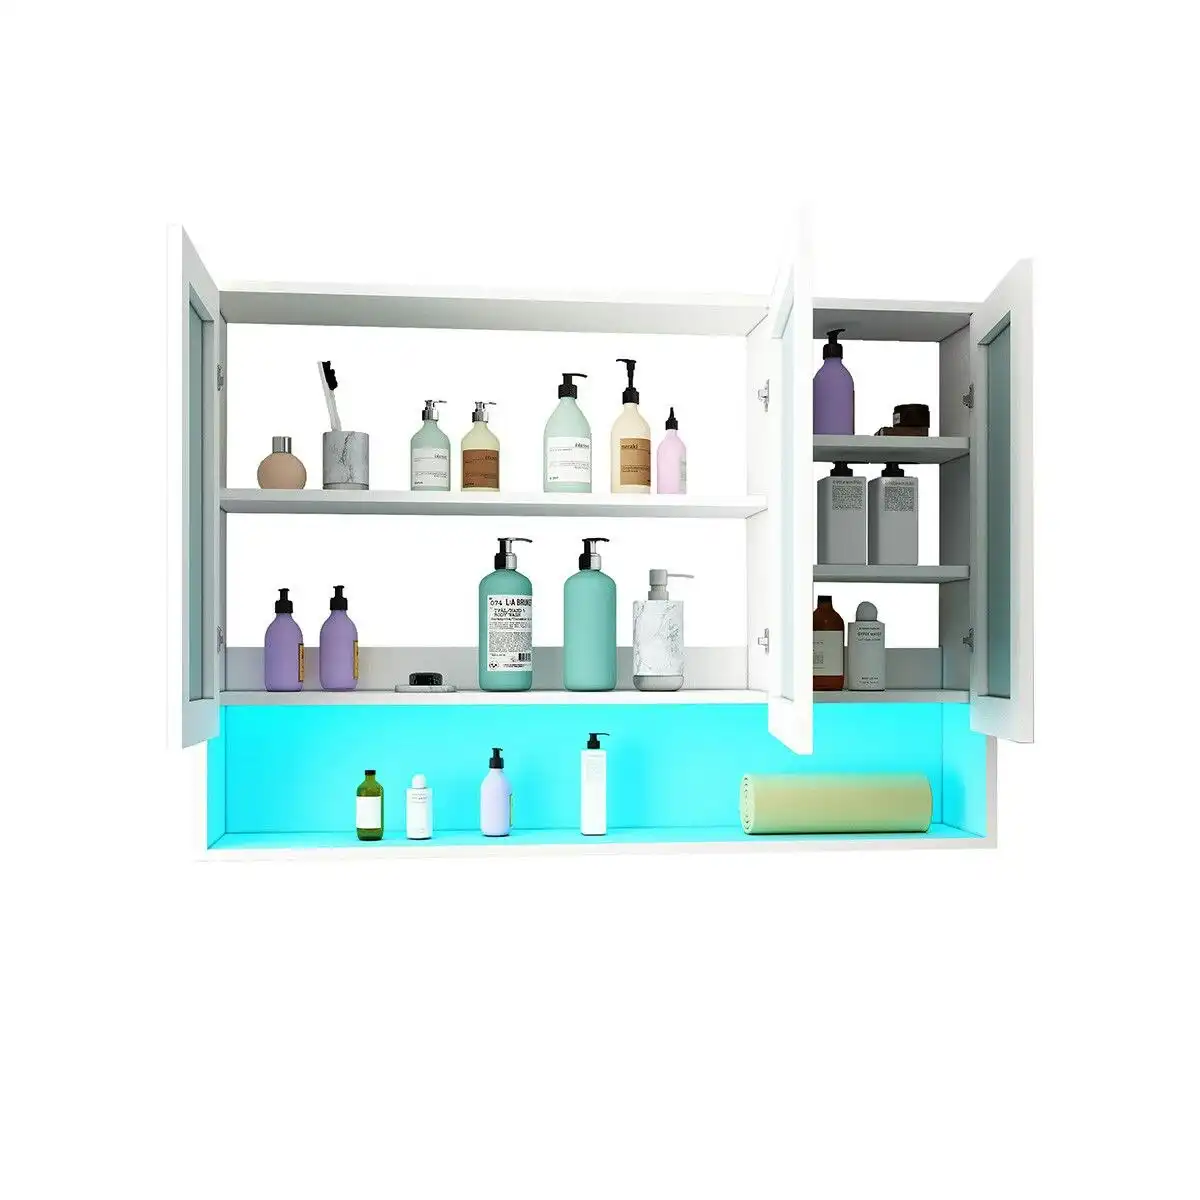 Ausway Bathroom Mirror Cabinet Medicine Shaver Shaving Wall Storage Cupboard Organiser Shelves Furniture with LED Lights Doors White